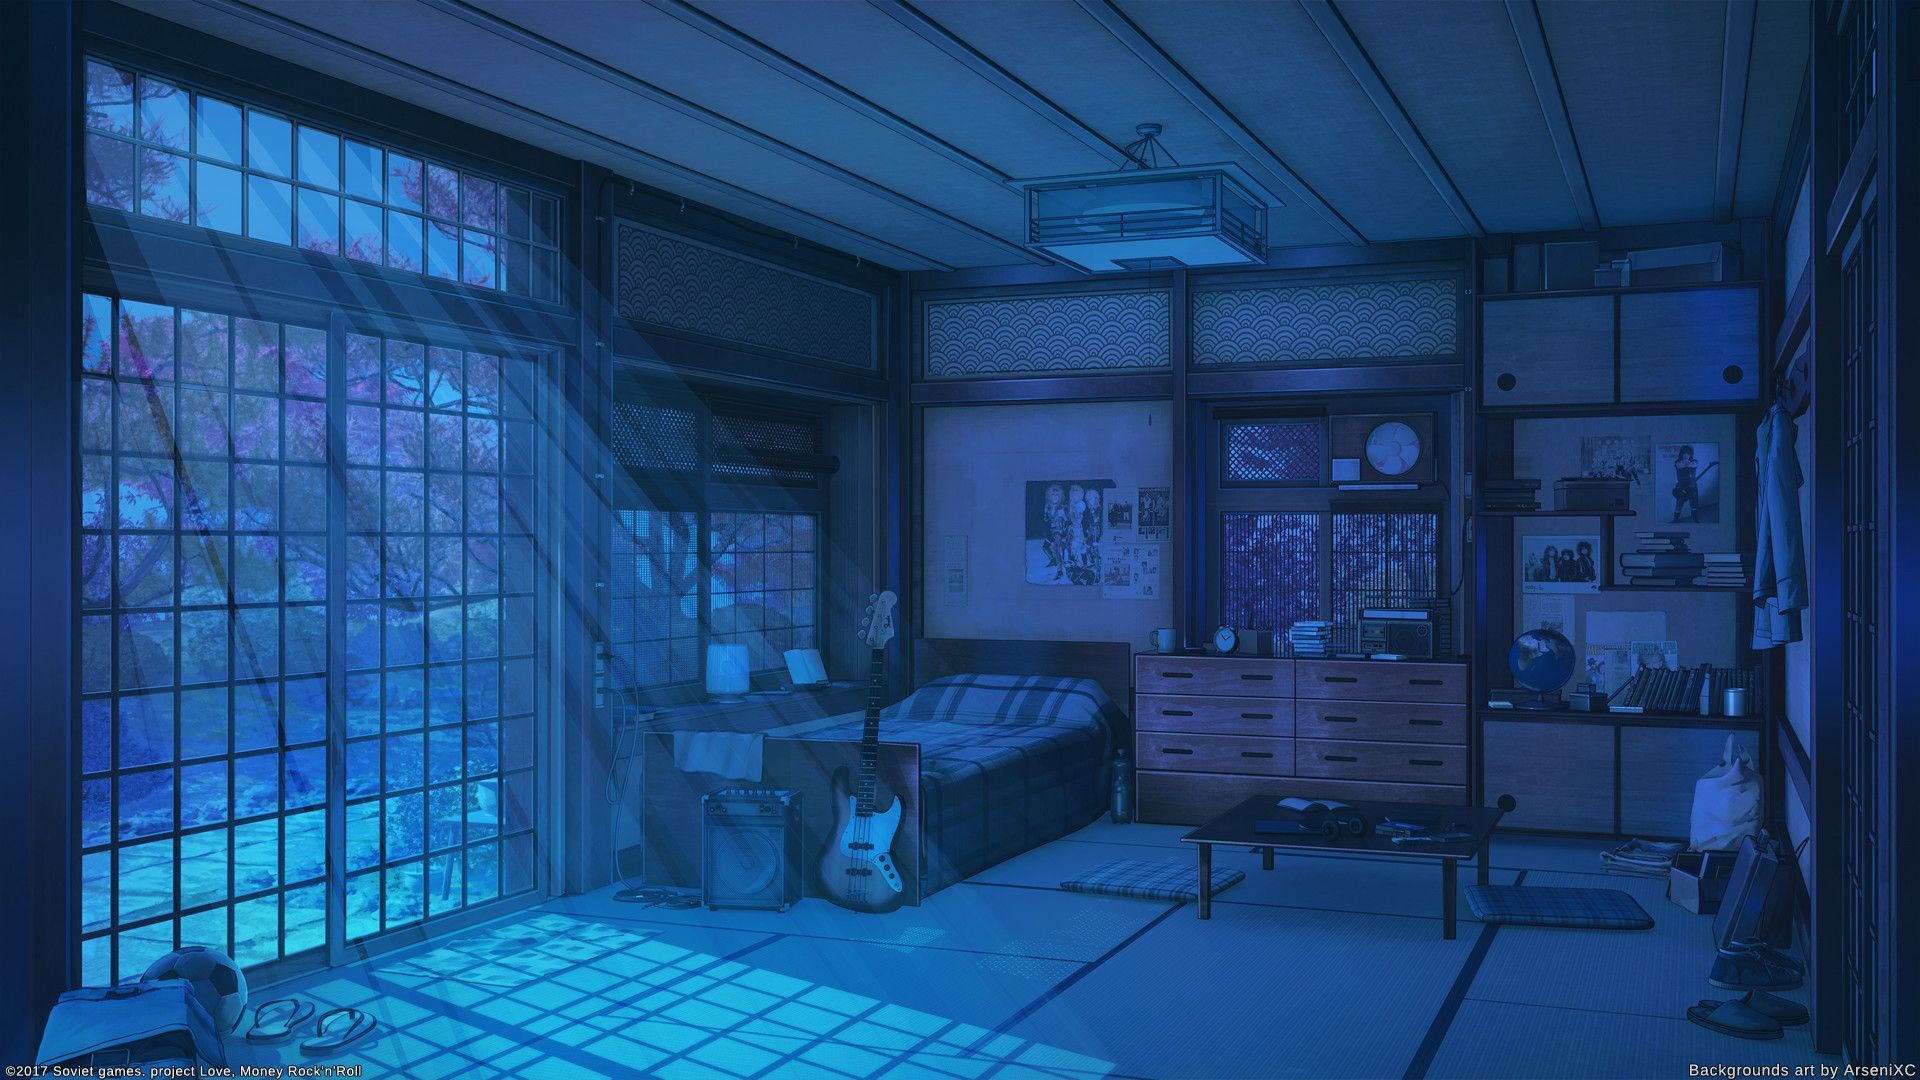 Page 5 | Anime Bedroom Background Images - Free Download on Freepik